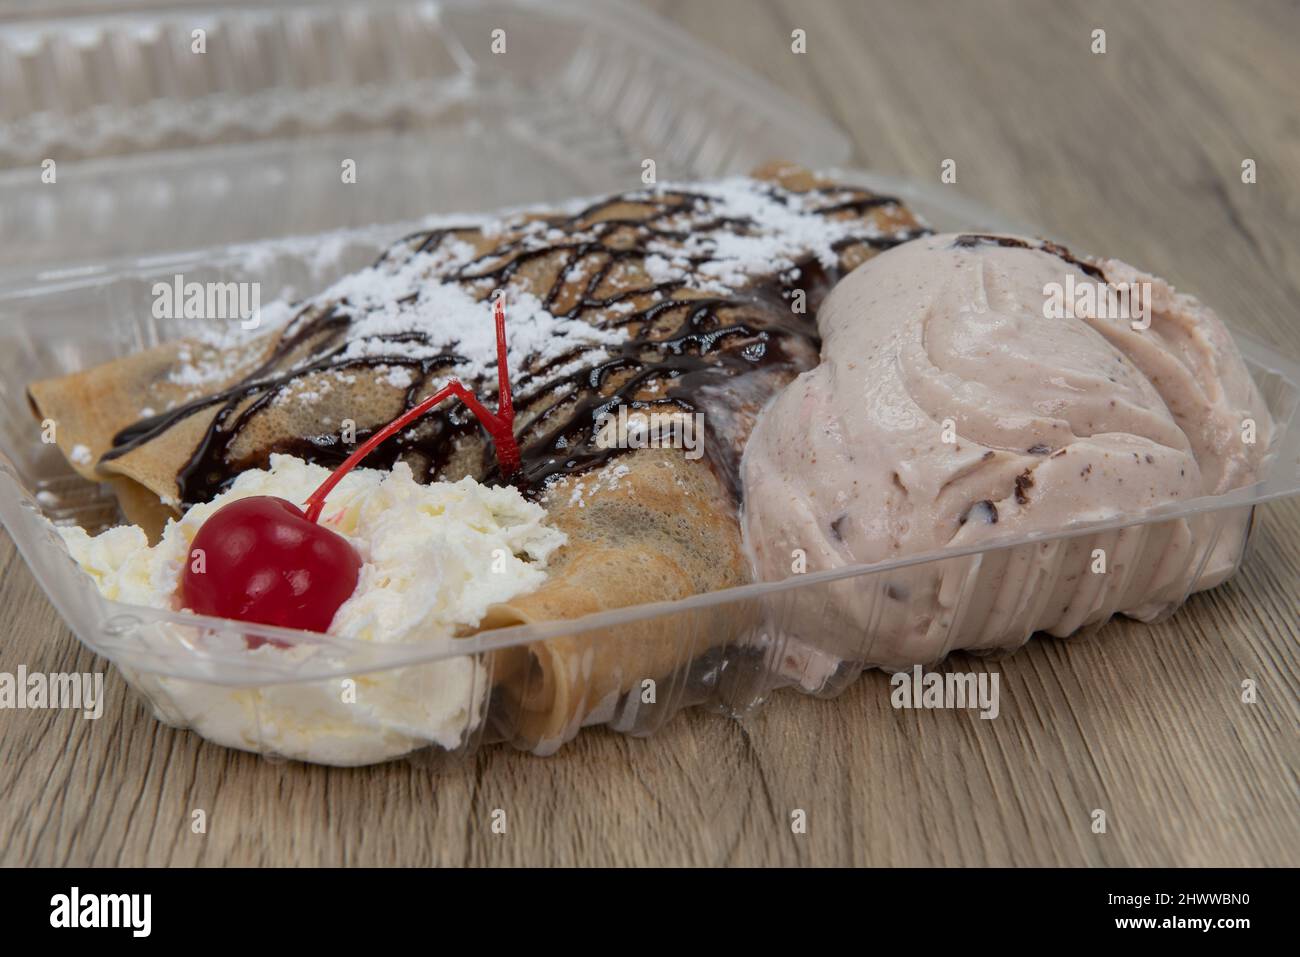 Hearty take out order of chocolate covered crepes, sprinkled with powdered sugar and whipped cream and served with ice cream. Stock Photo